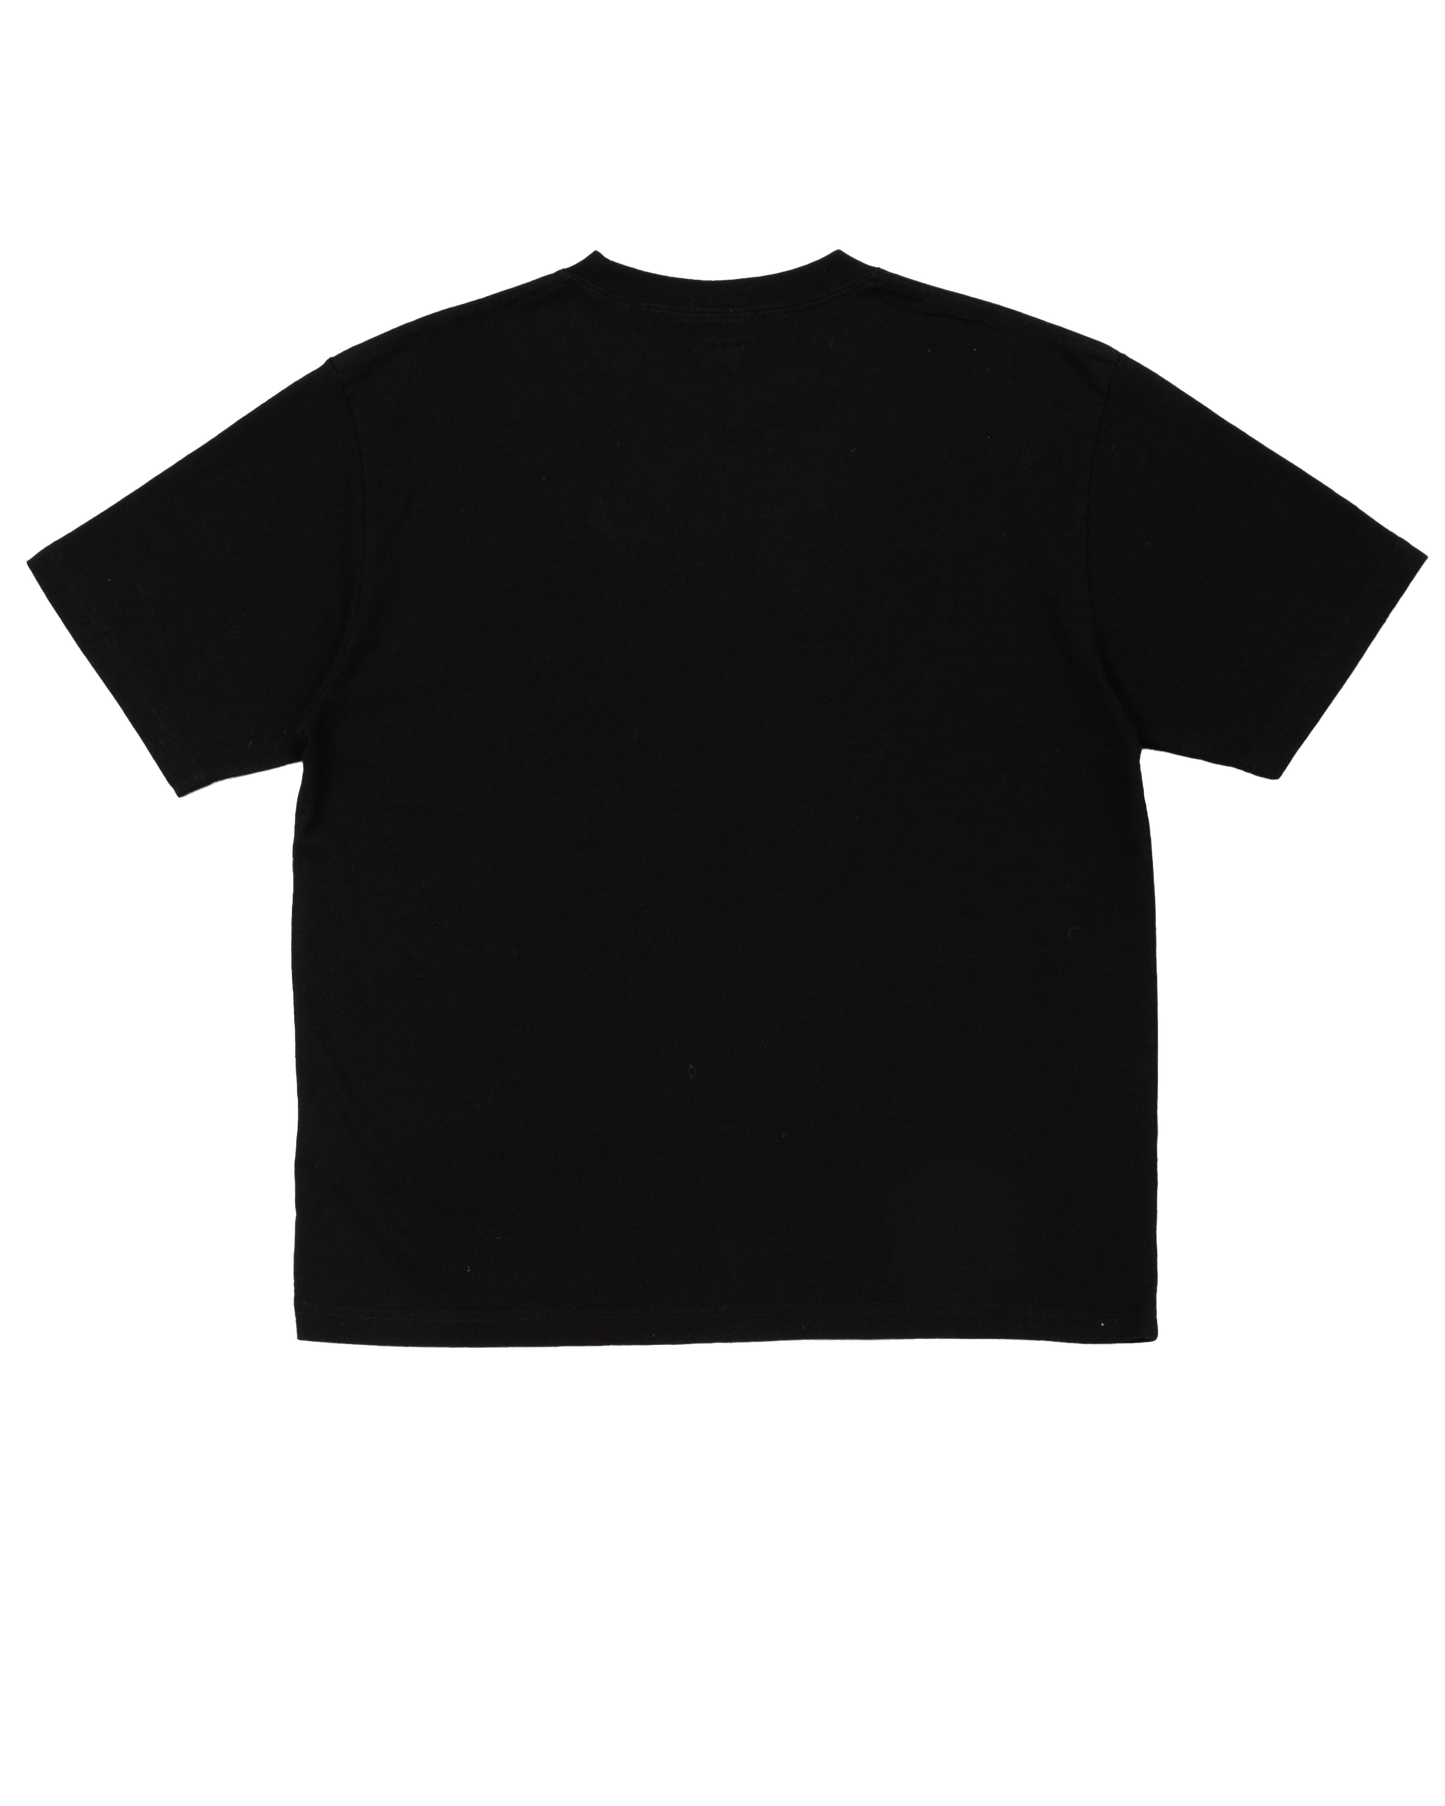 HERESY Demons Out Tee